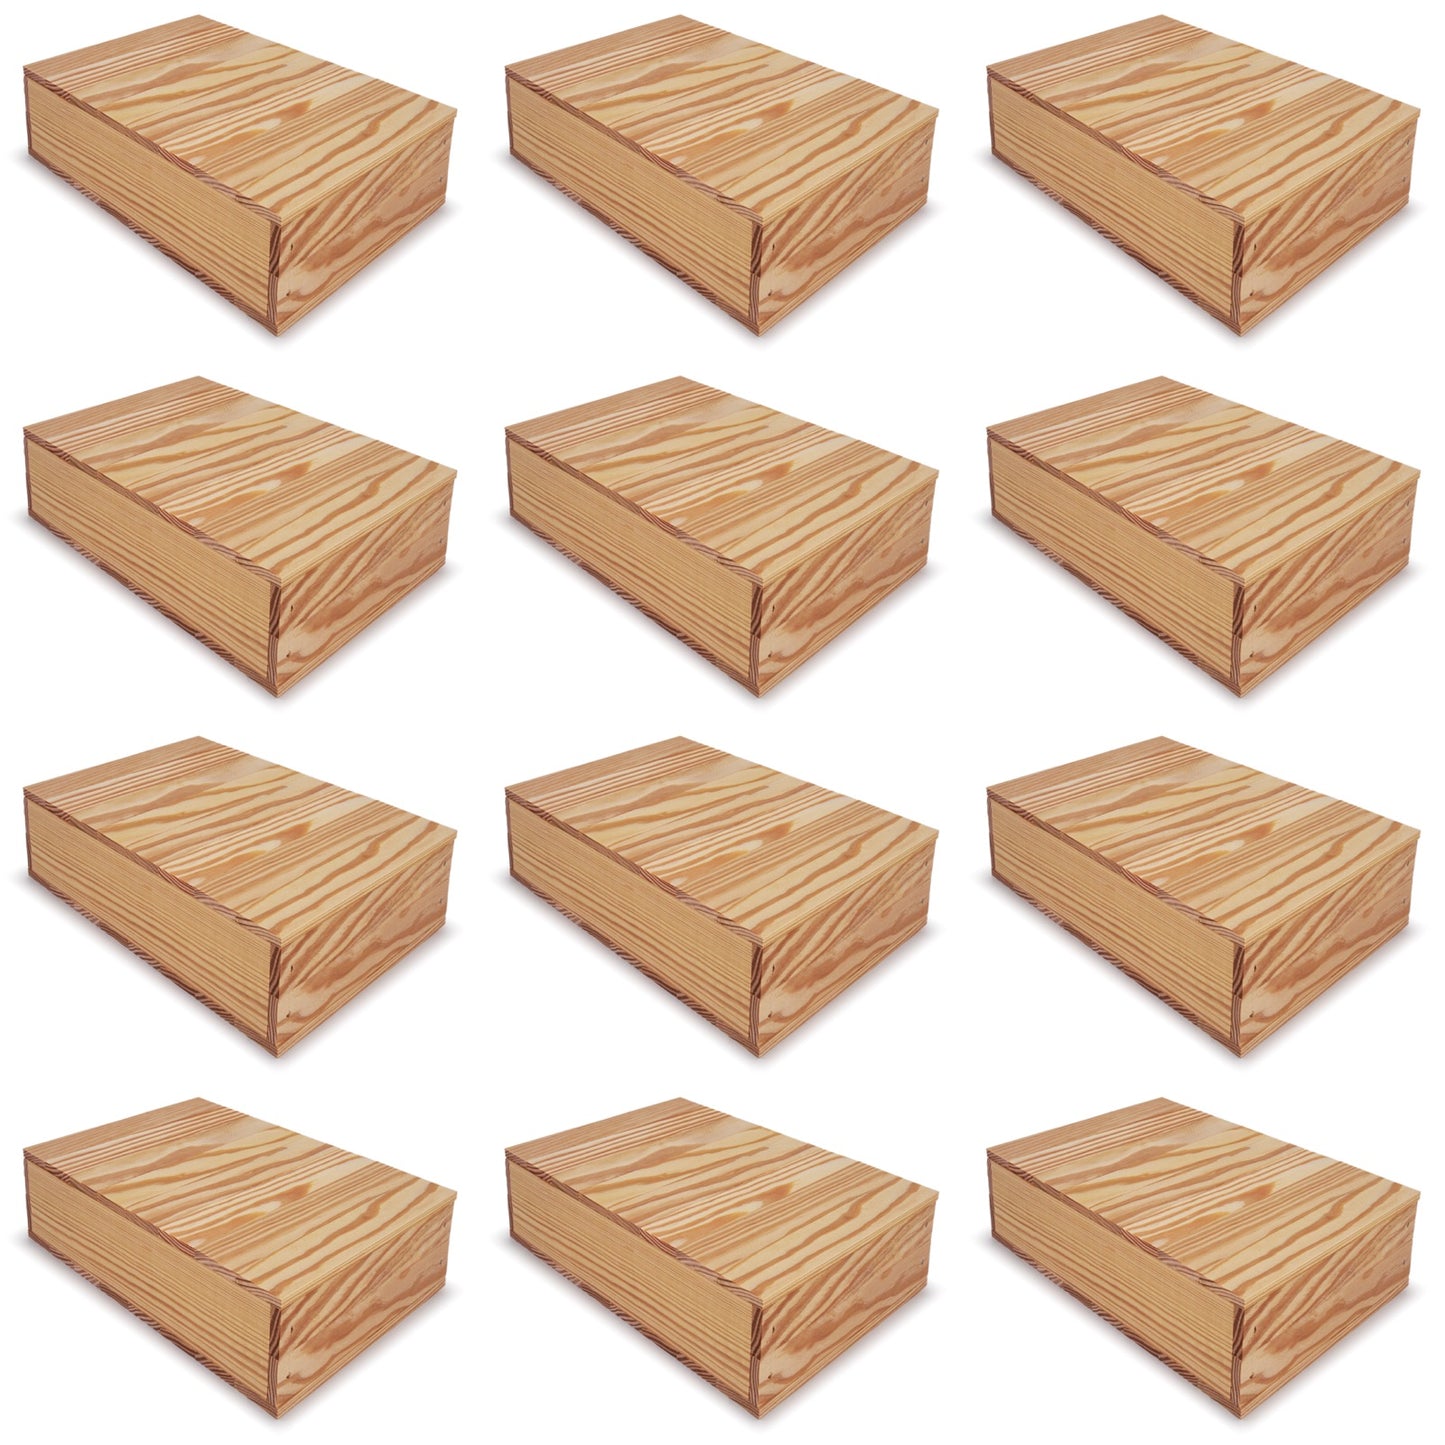 12 Small wooden crates with lid 8x13.25x3.5